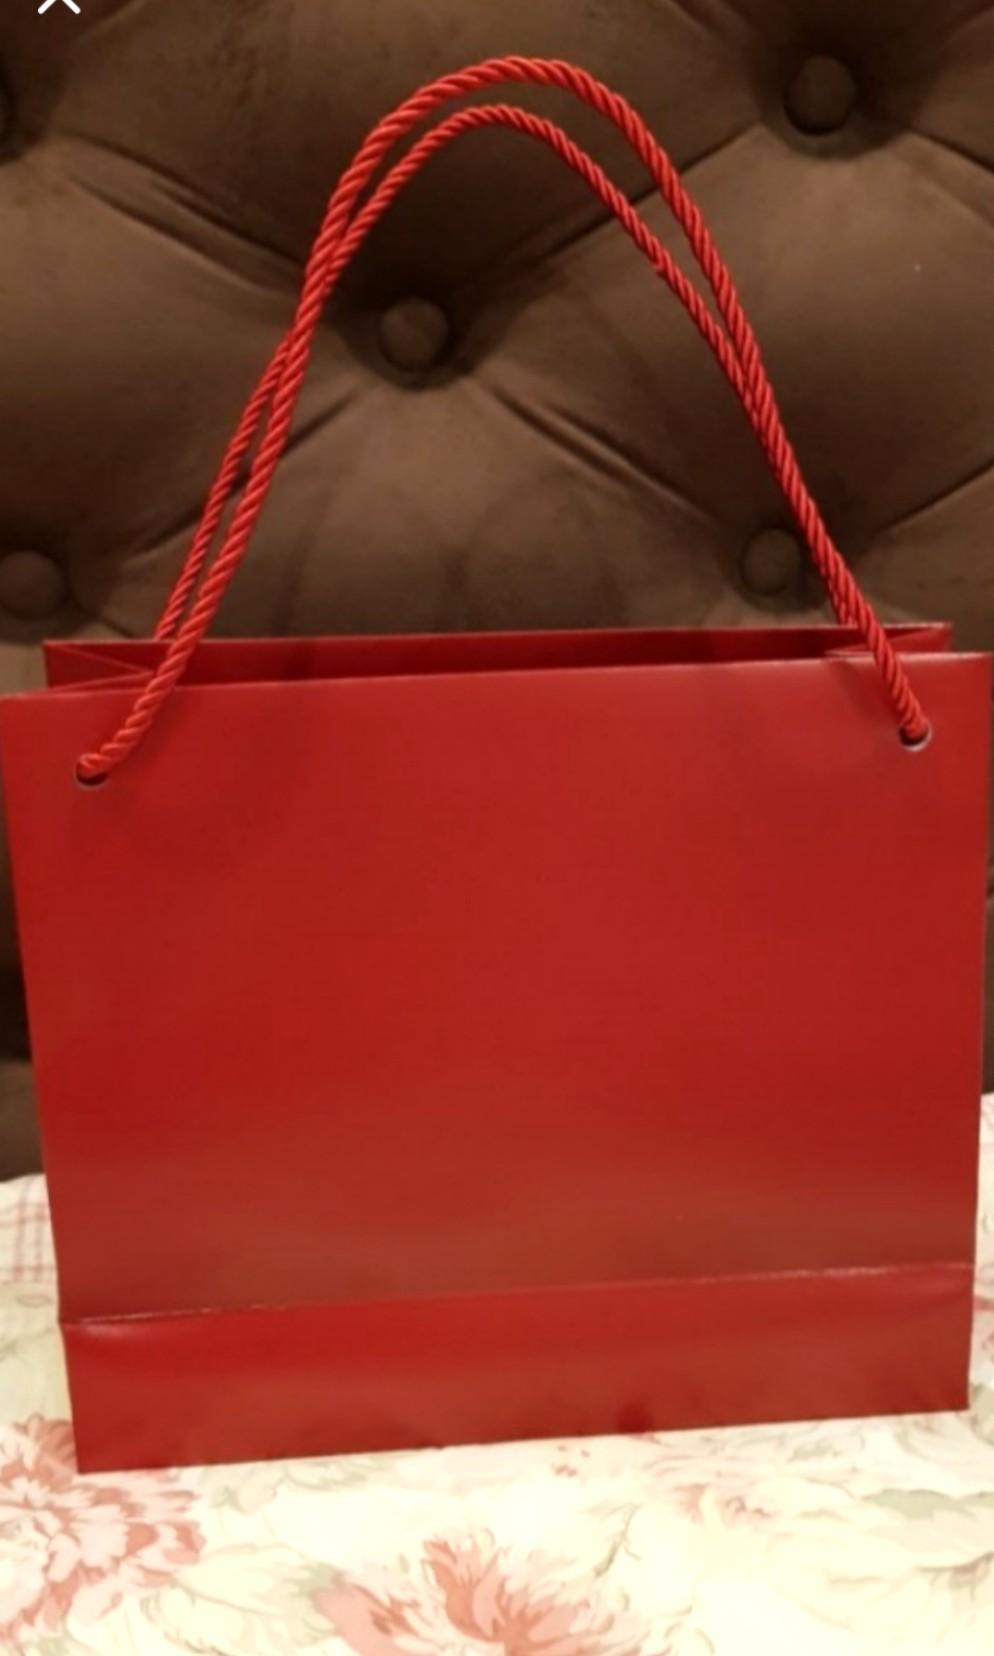 Authentic Cartier Gift Bag Shopping Paper Bags 10'' x 9'' & 8” x 7”